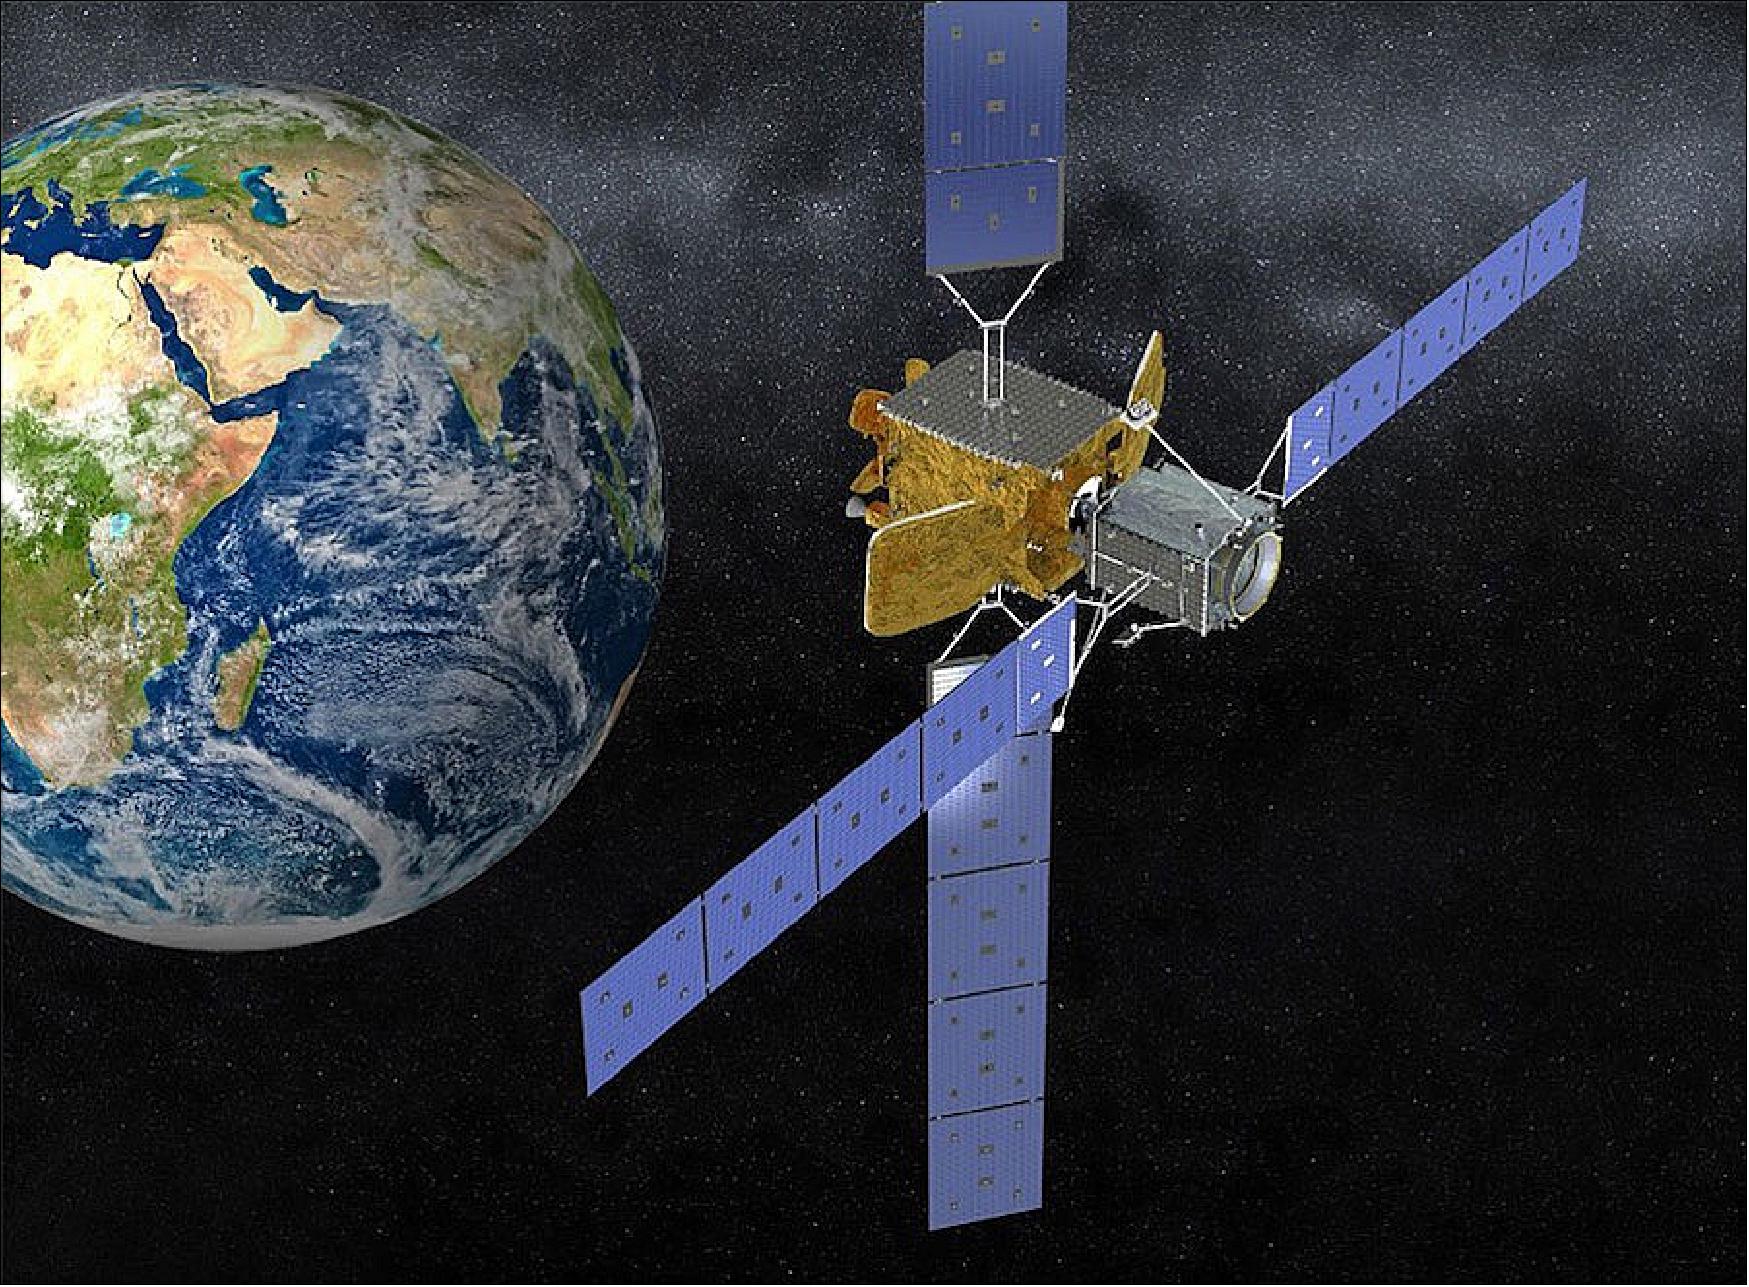 Figure 3: Artist's rendition of the Intelsat 901 satellite (left) after the docking of the MEV-1 (right), image credit: Northrop Grumman Innovation Systems